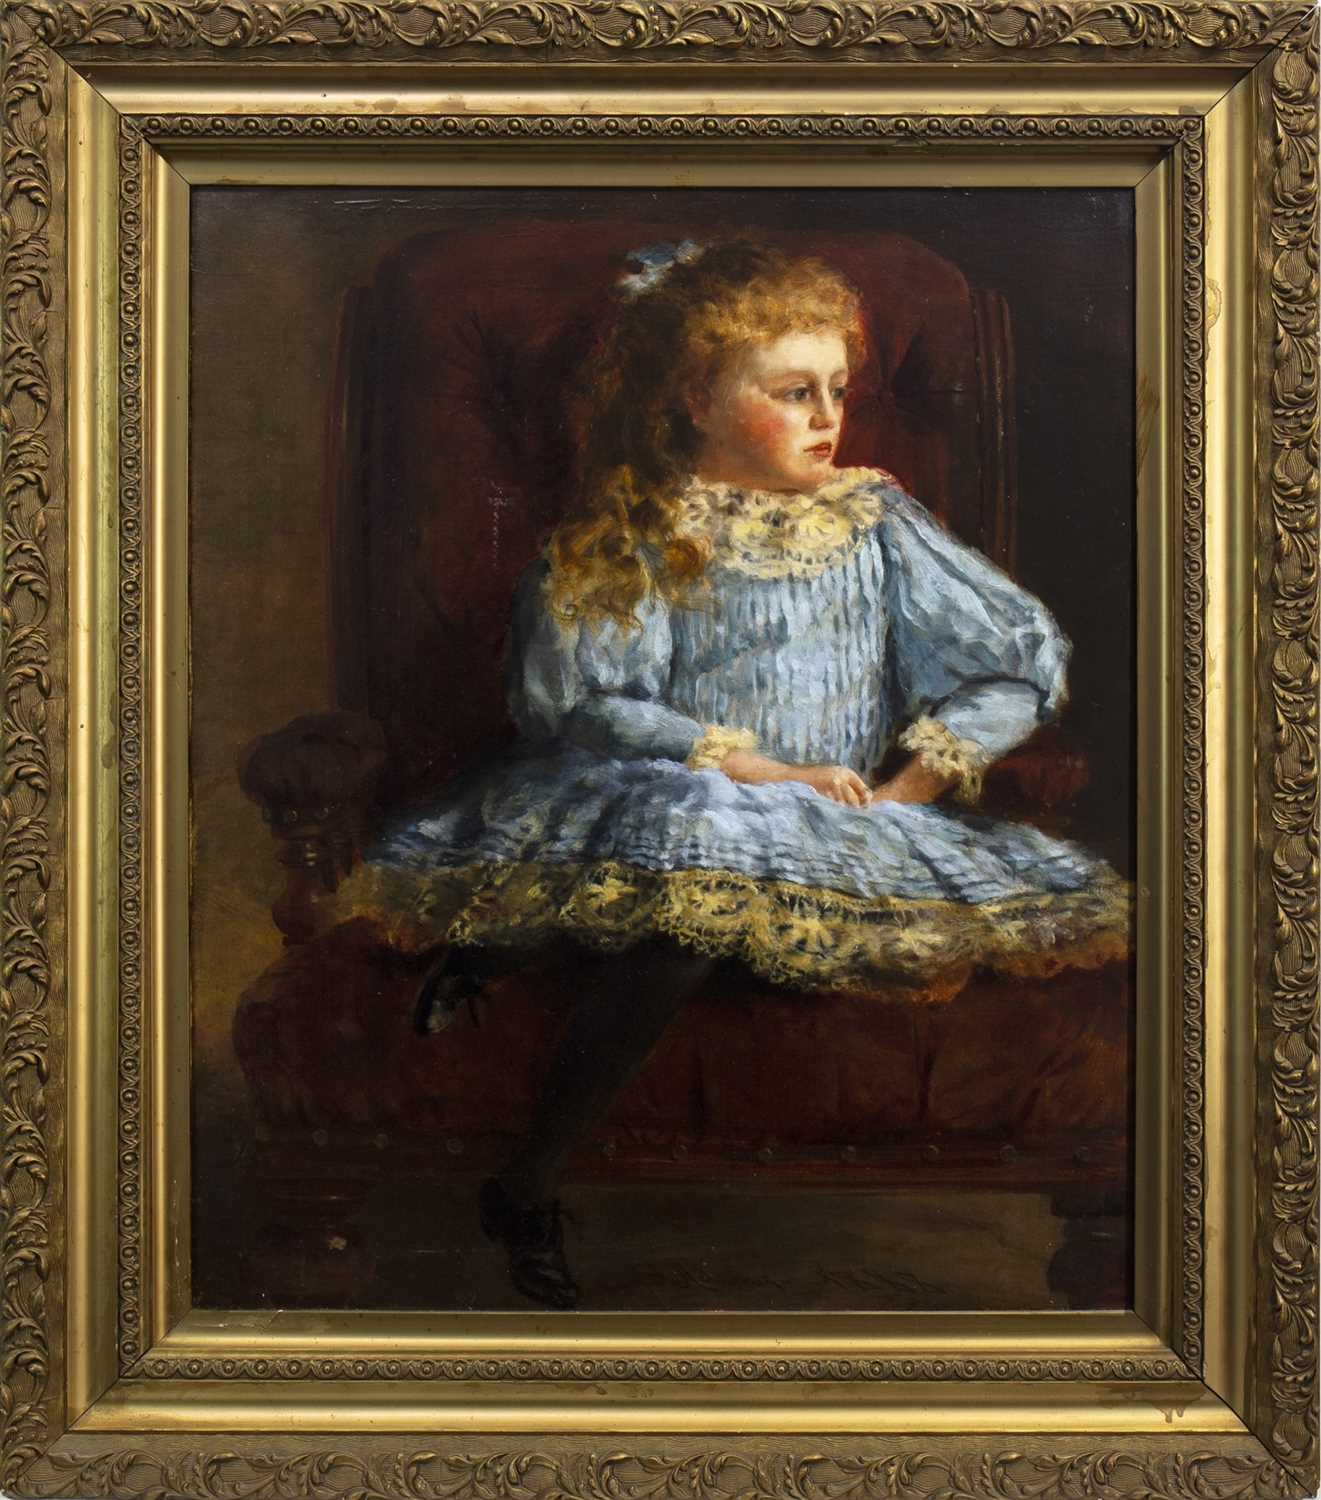 Lot 478 - YOUNG GIRL IN A BLUE DRESS, AN OIL BY S ADAMS